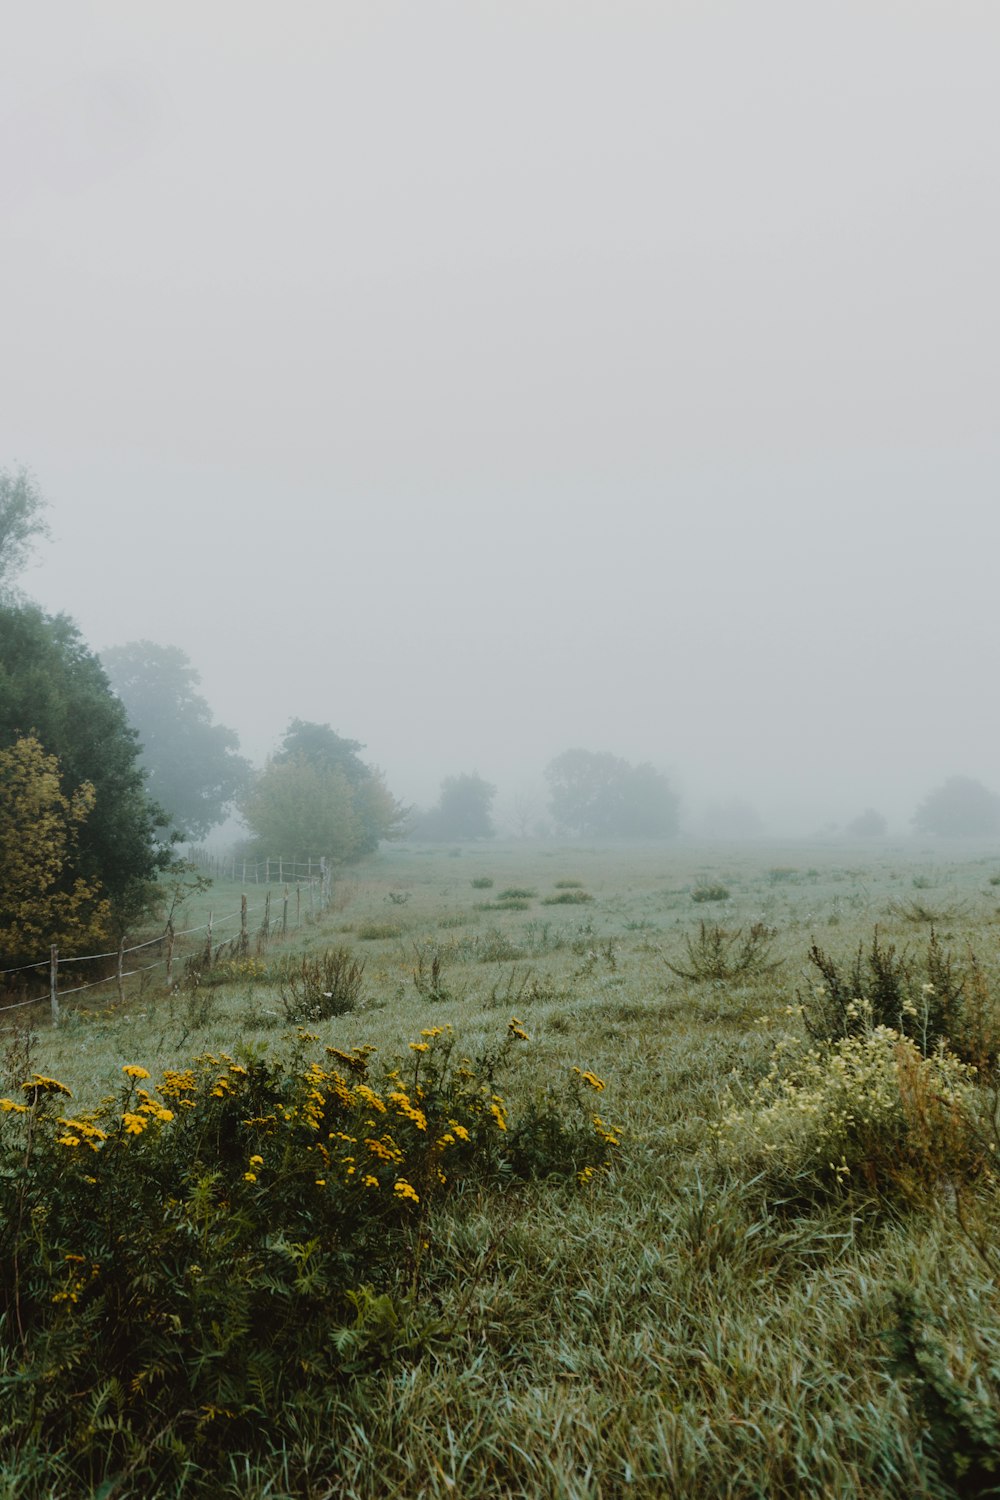 a foggy field with yellow flowers in the foreground